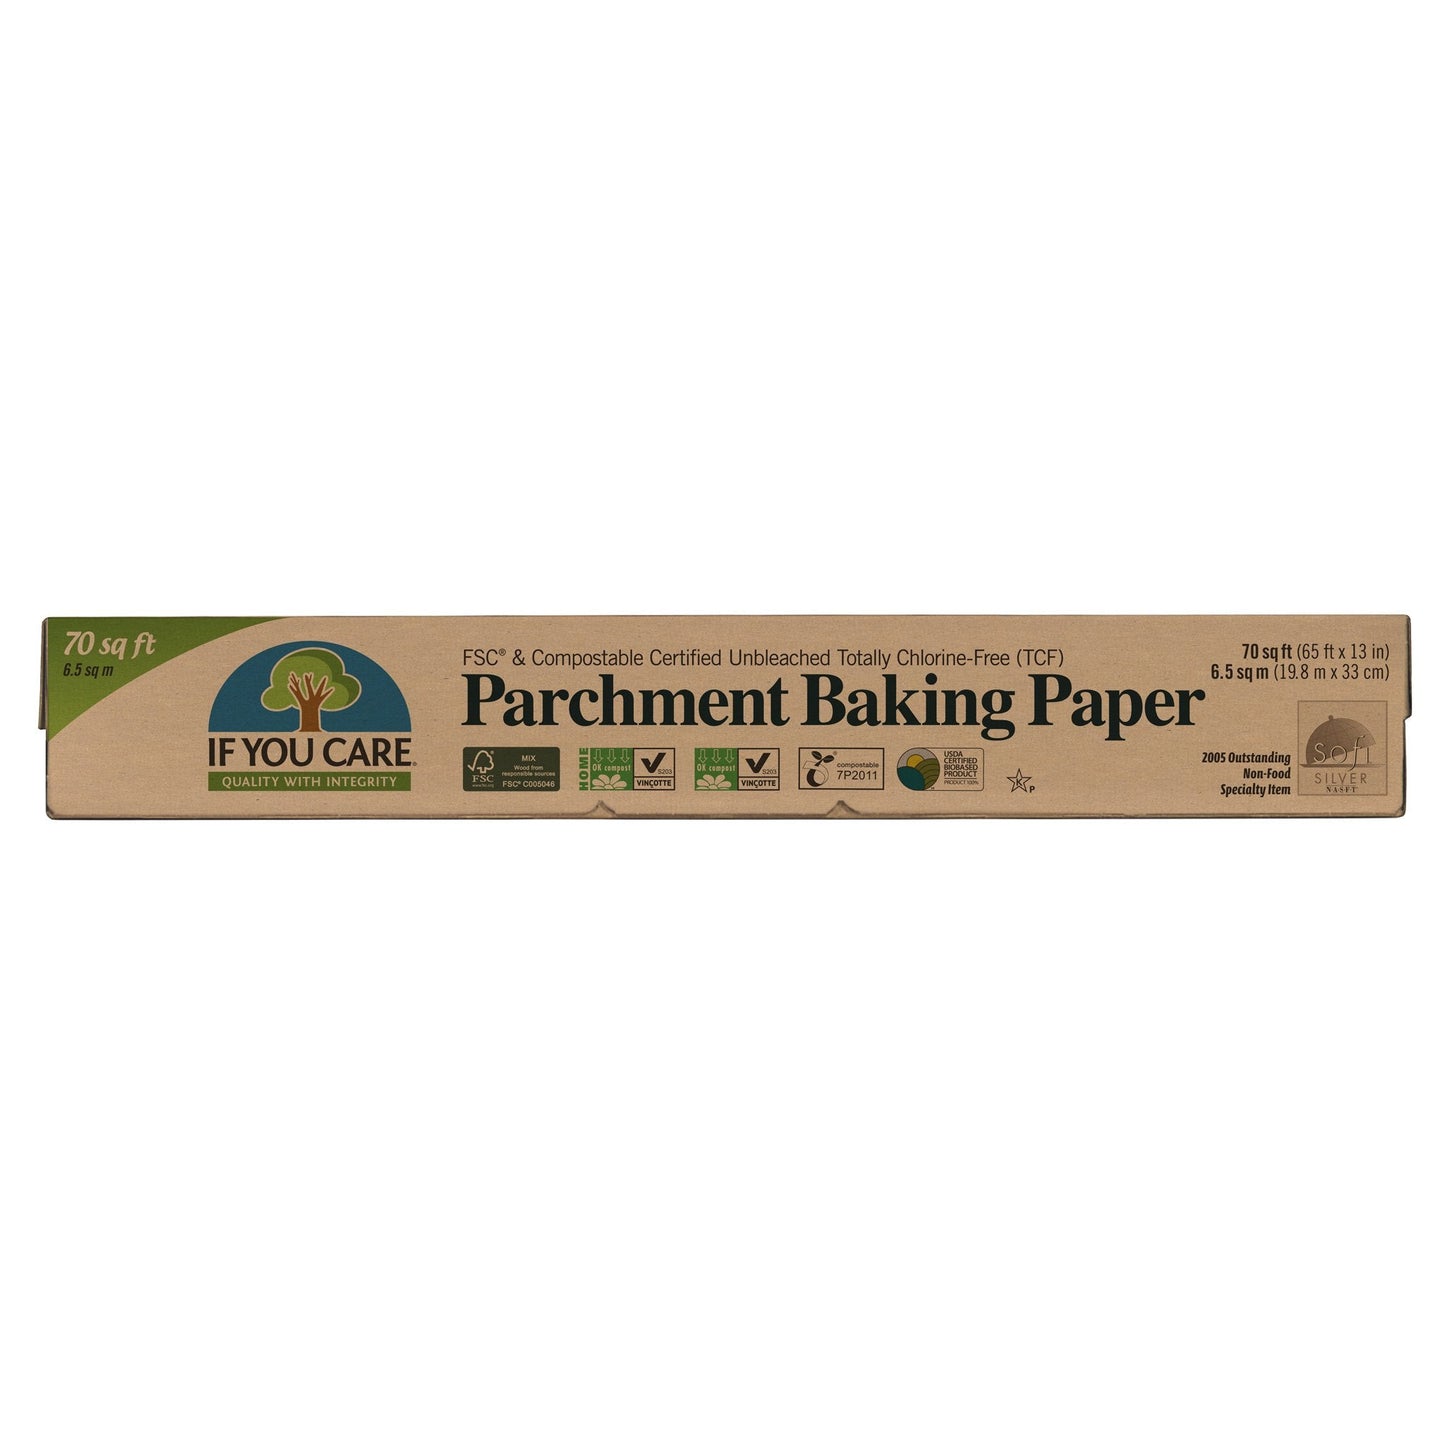 If You Care Parchment Baking Paper 6.5 sqm box - Just Natural